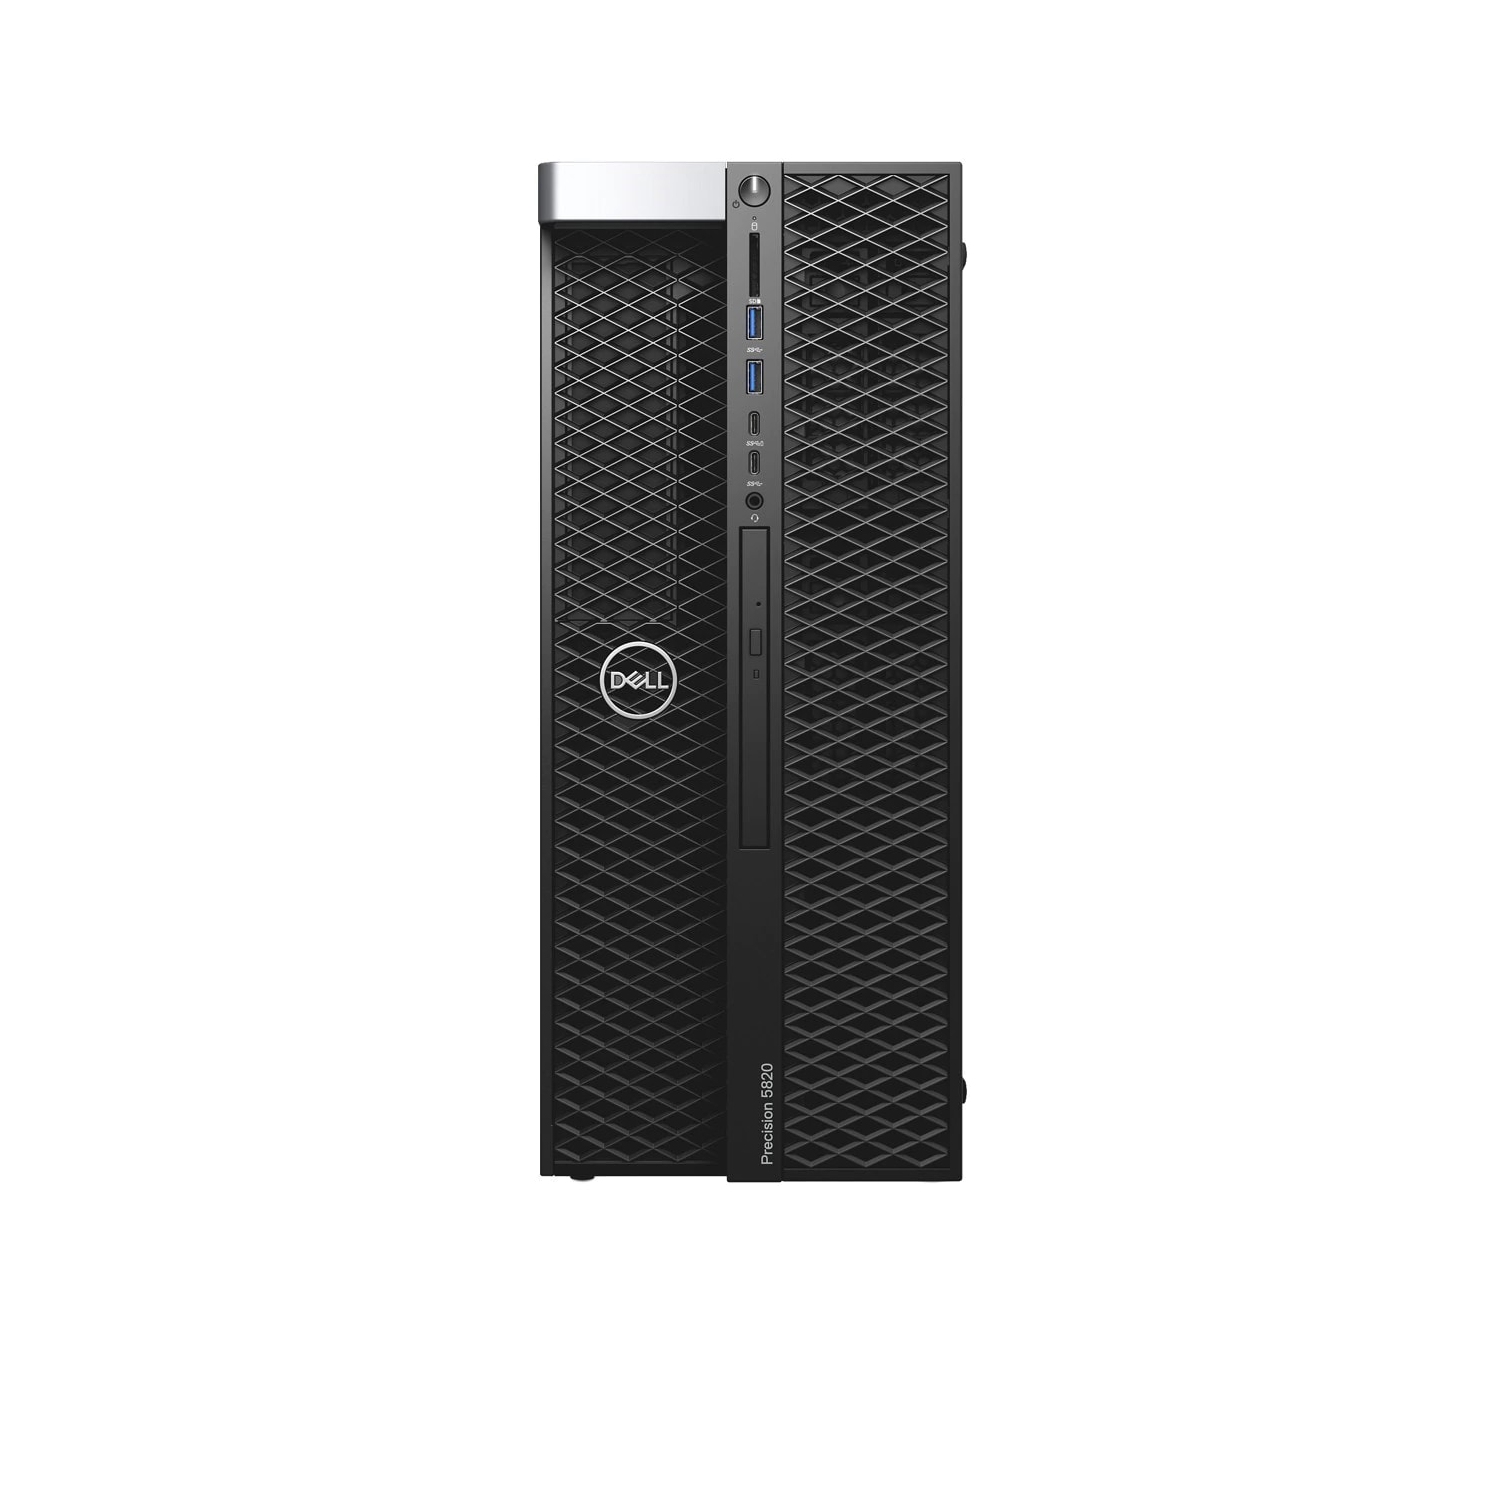 Refurbished (Excellent) - Dell Precision T5820 Workstation Desktop (2018) | Core Xeon W - 1TB SSD - 32GB RAM - RTX 4000 | 10 Cores @ 4.5 GHz Certified Refurbished